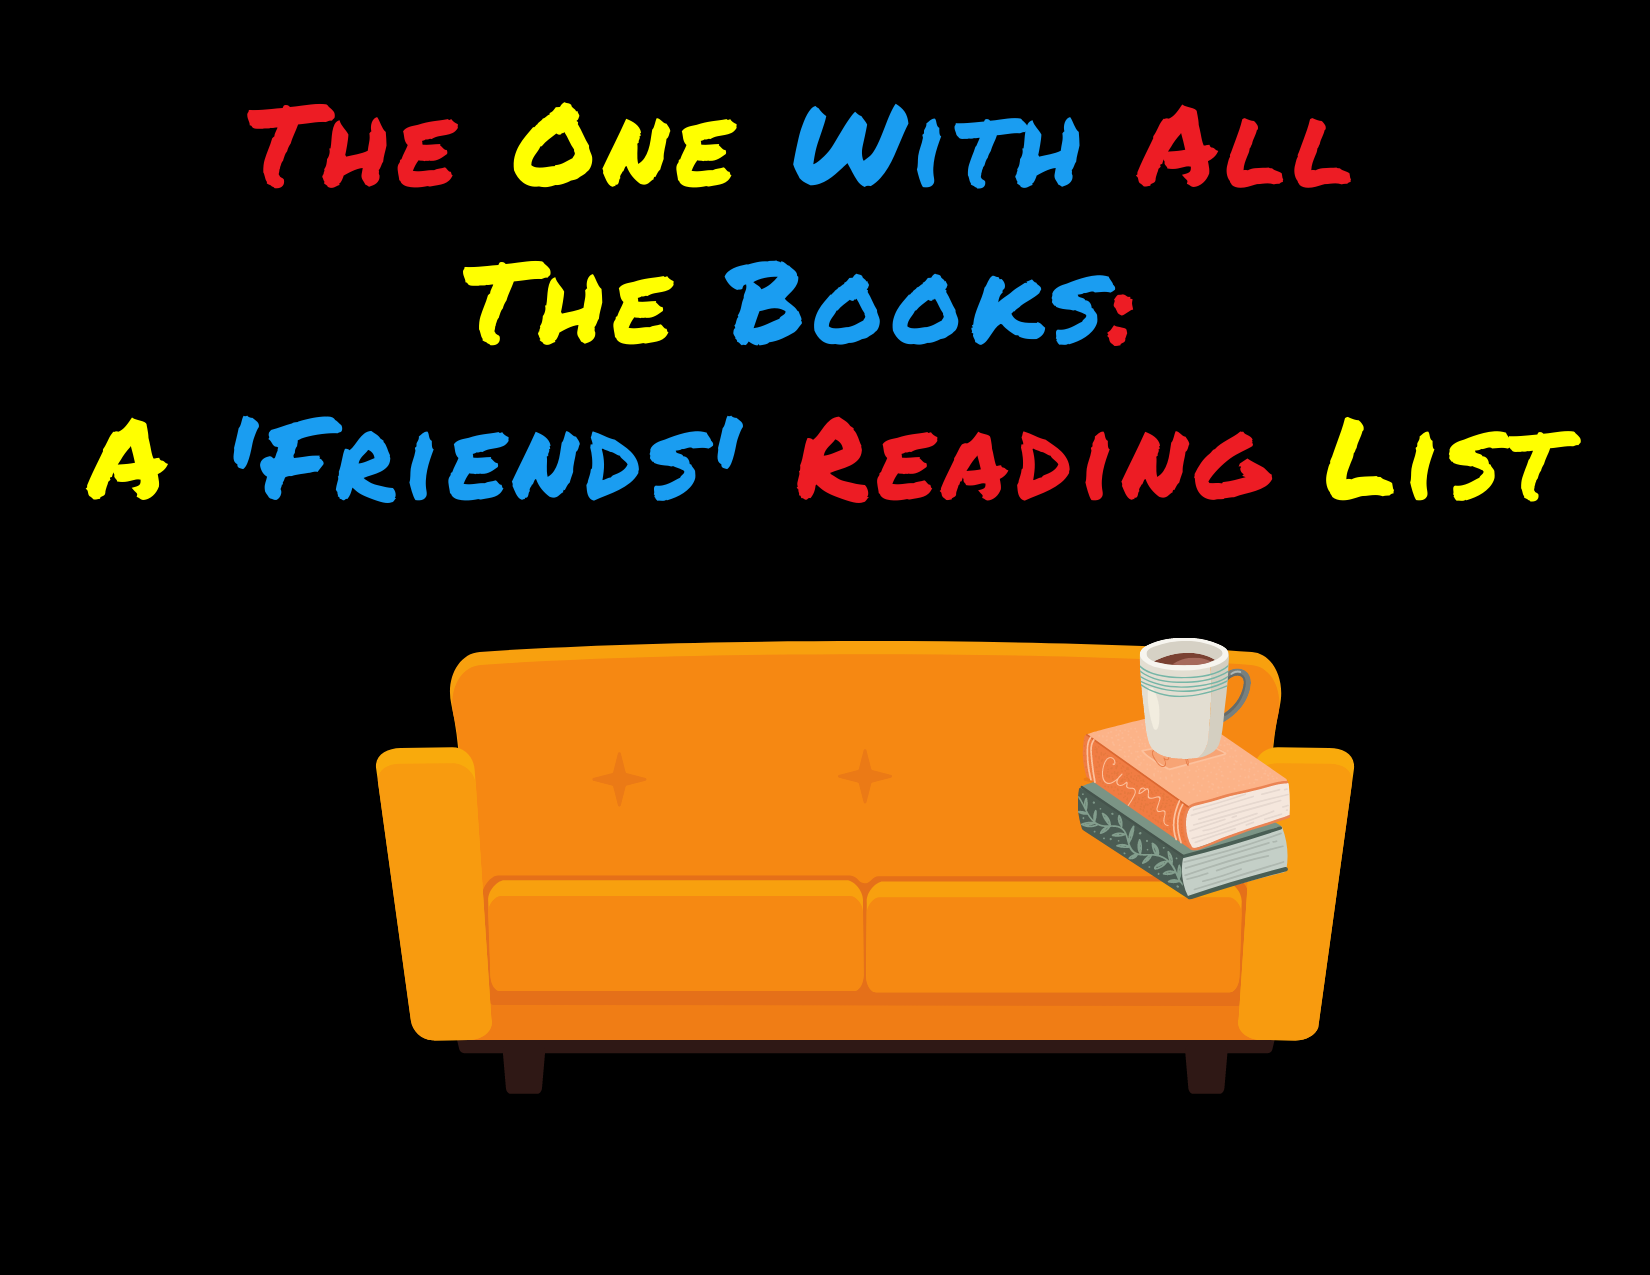 Image for "The One With All the Books A Friends Reading List" 